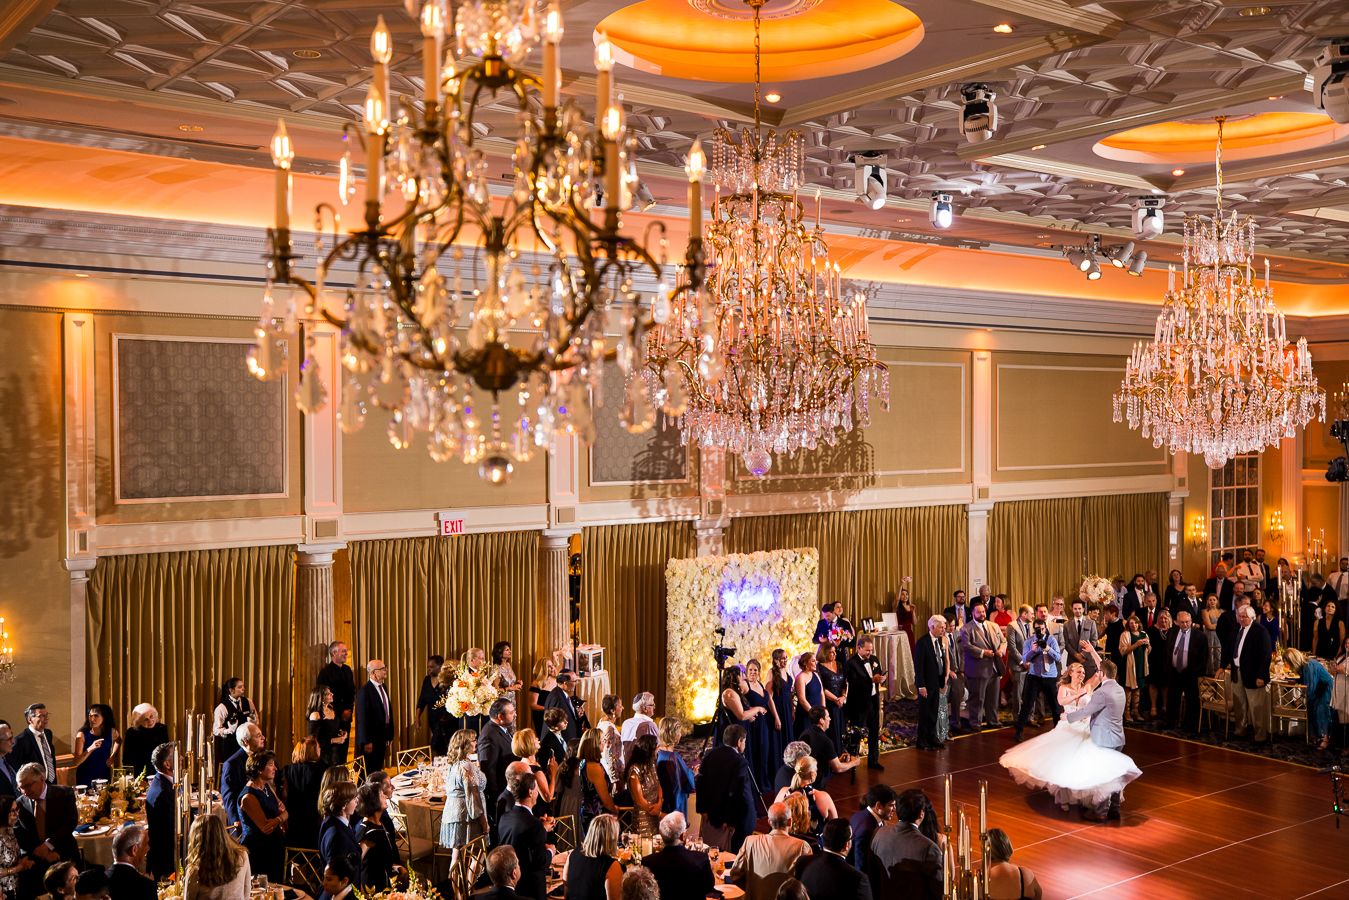 creative NJ Wedding Photographer, lisa rhinehart, captures this unique, creative image of the bride and groom's first dance from on the balcony which captured all of their guests and family standing and cheering for them during their reception at the palace at somerset 